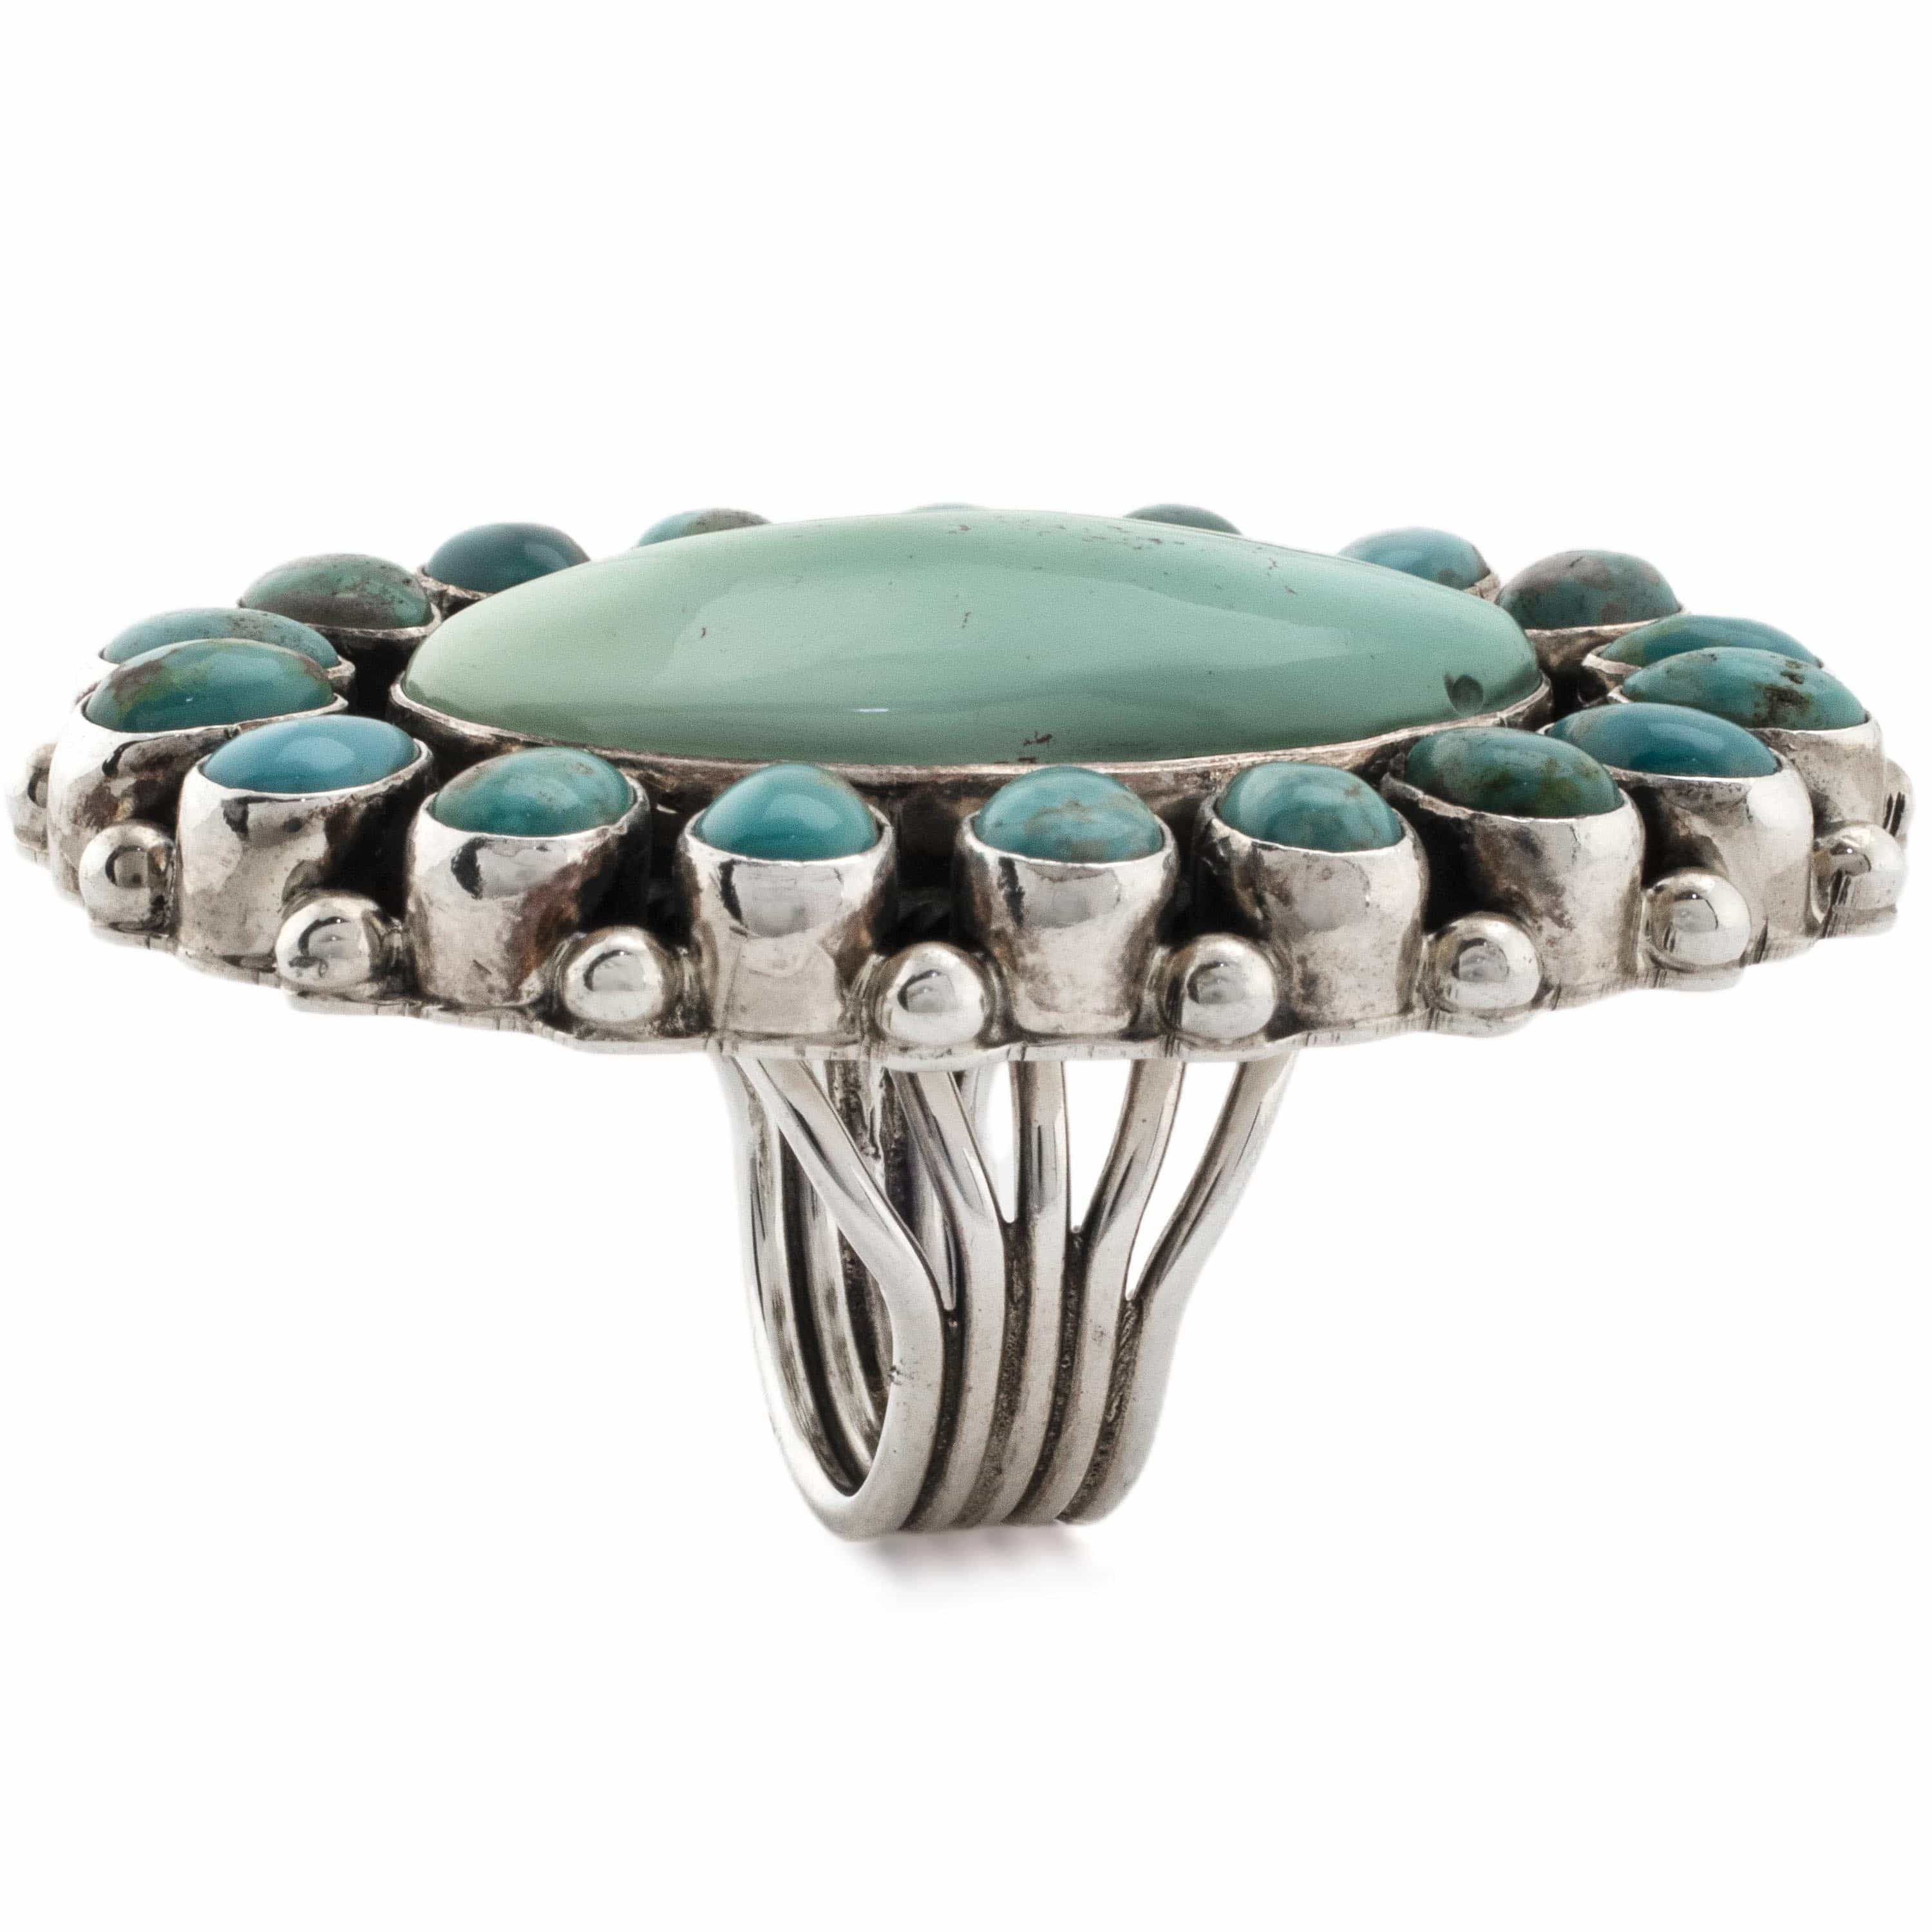 Kalifano Native American Jewelry 7 Kathleen Chavez Fox and Royston Turquoise USA Native American Made 925 Sterling Silver Ring NAR2400.002.7